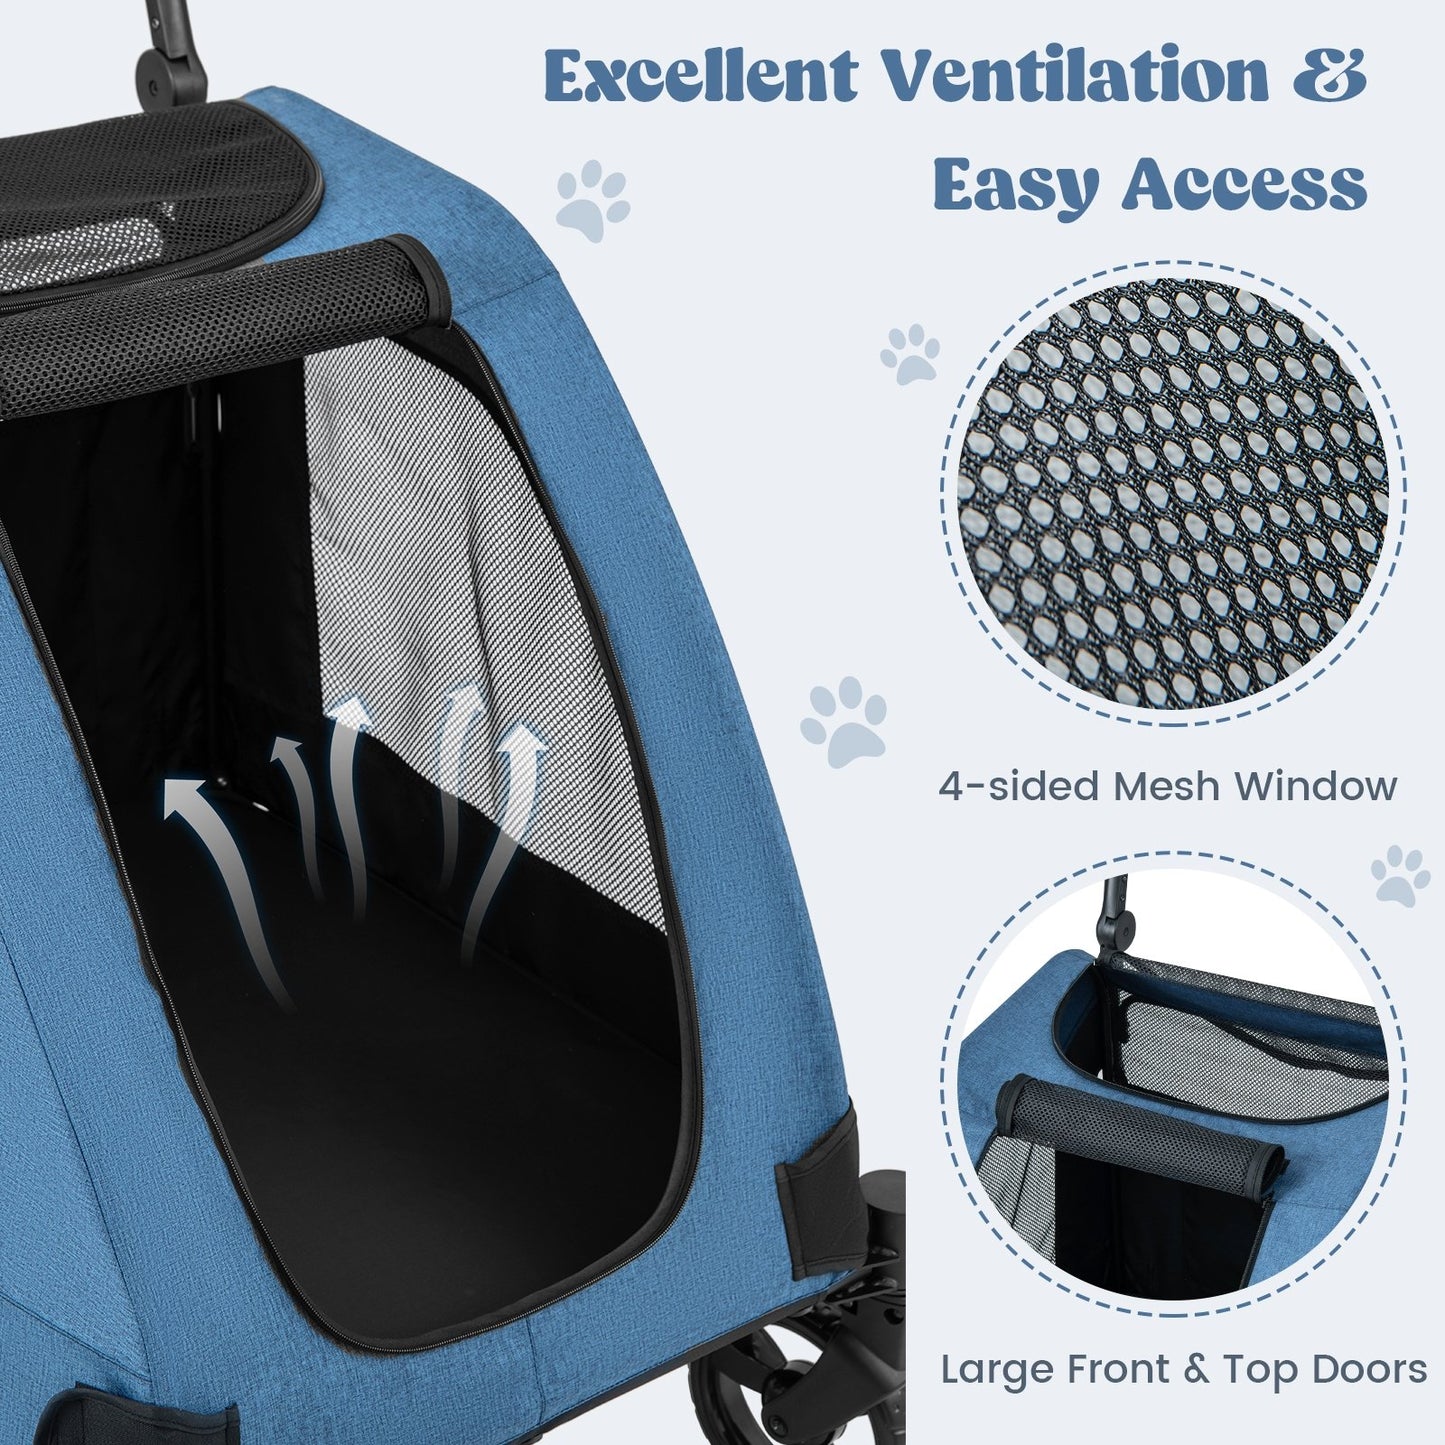 4 Wheels Extra Large Dog Stroller Foldable Pet Stroller with Dual Entry, Blue